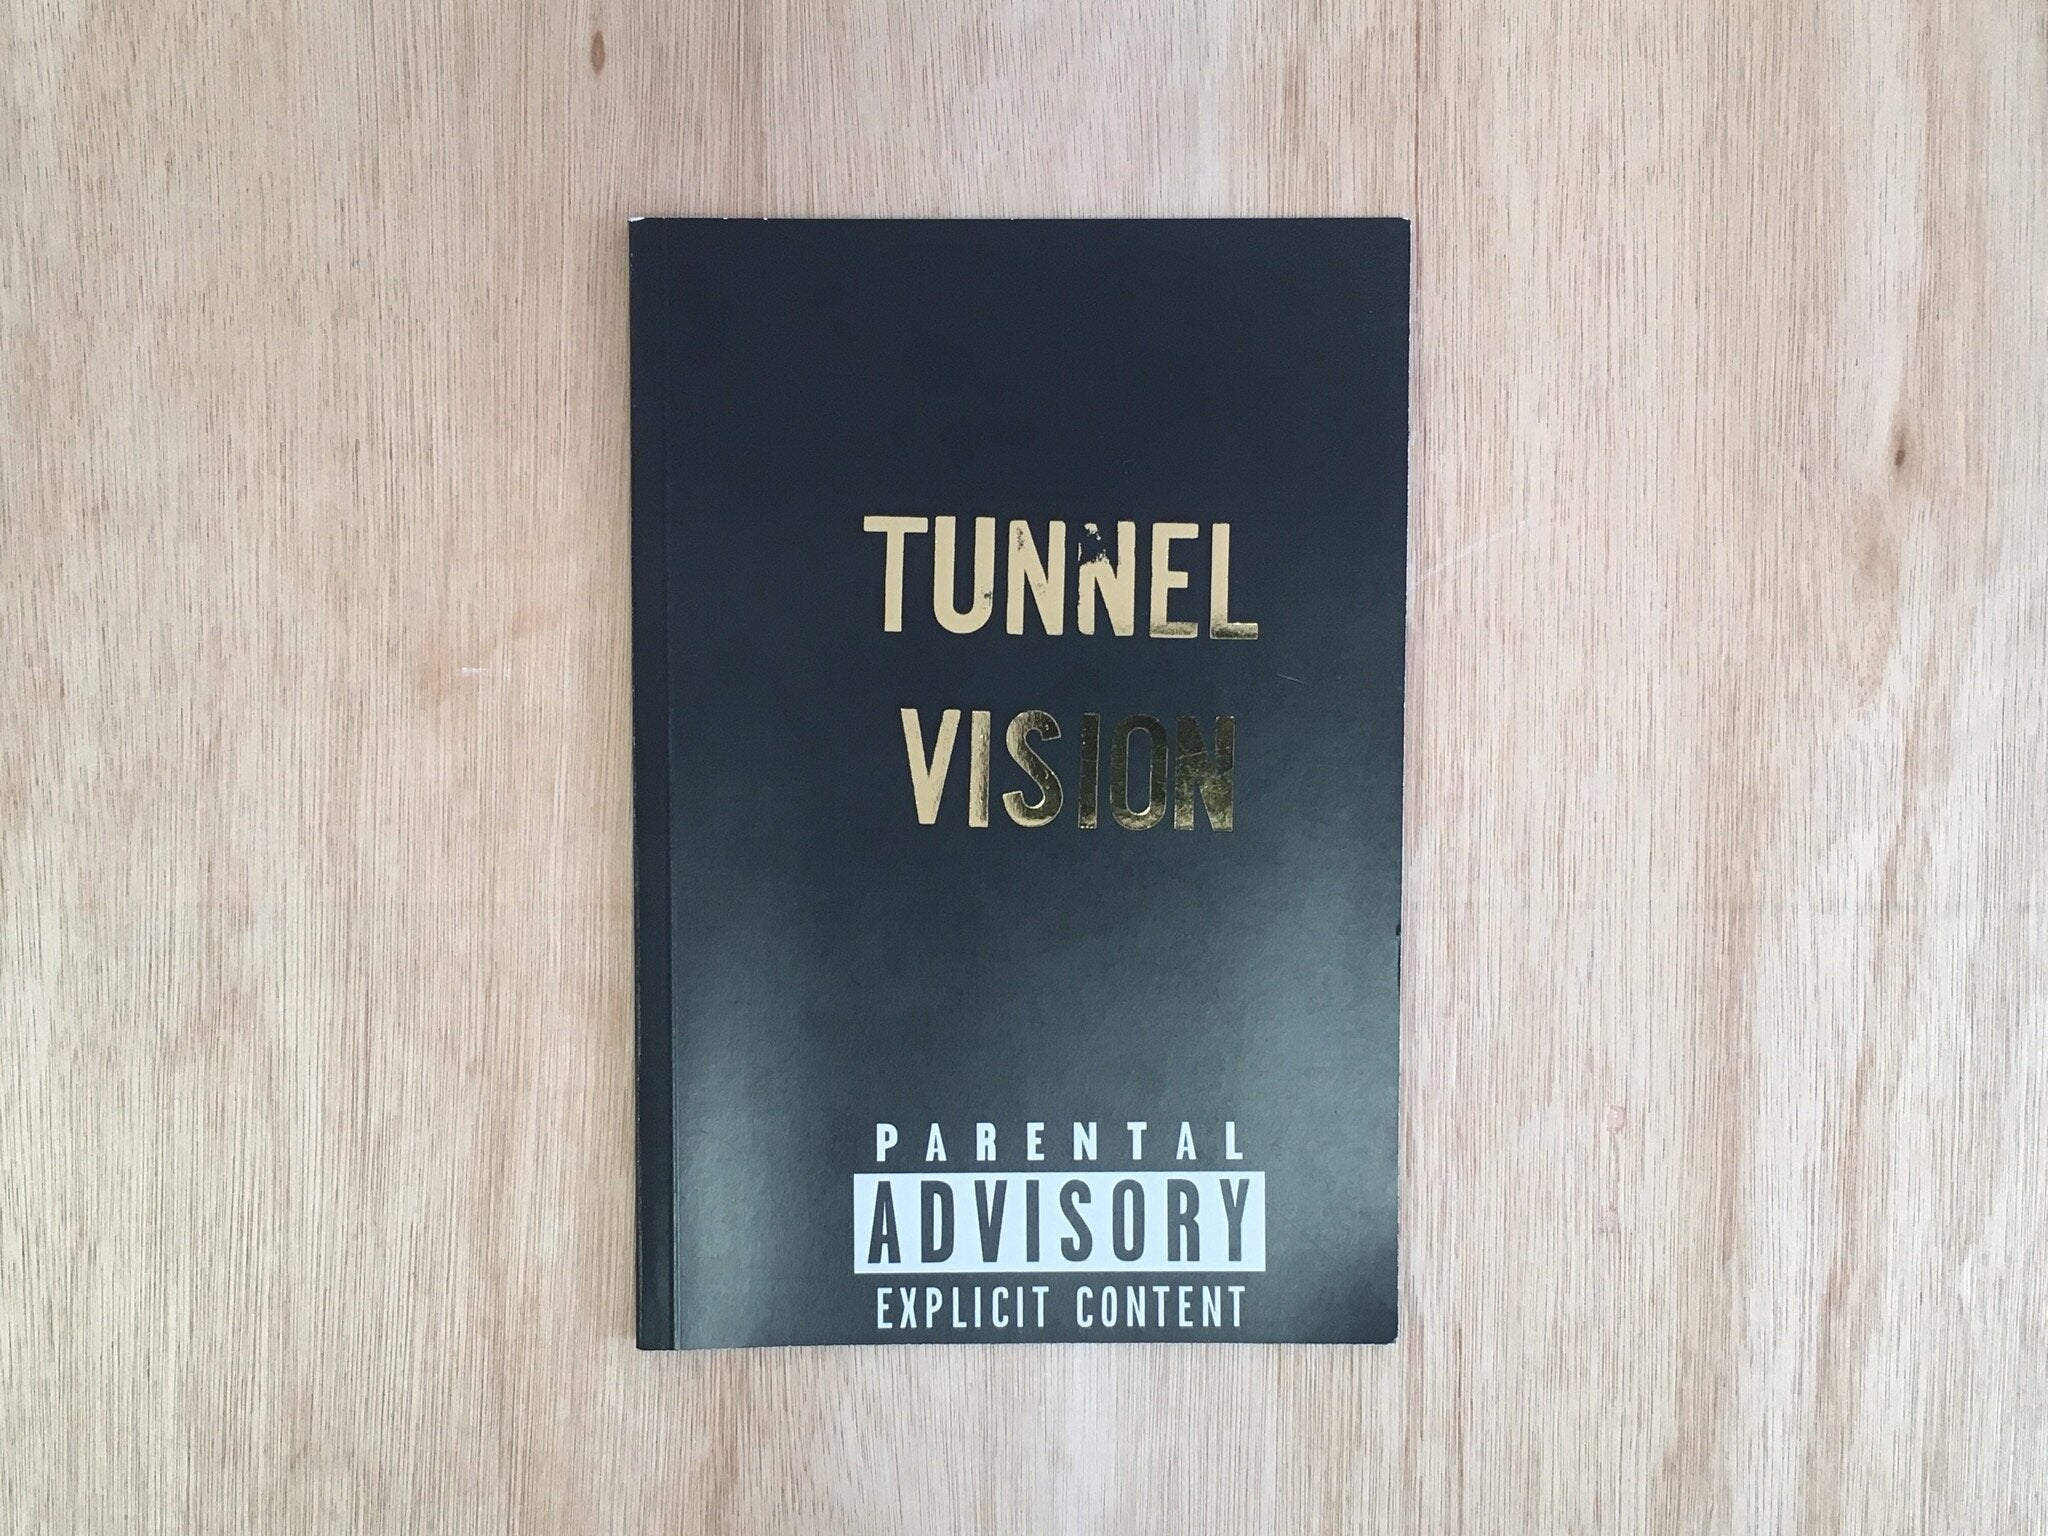 TUNNEL VISION by Alesh Compton